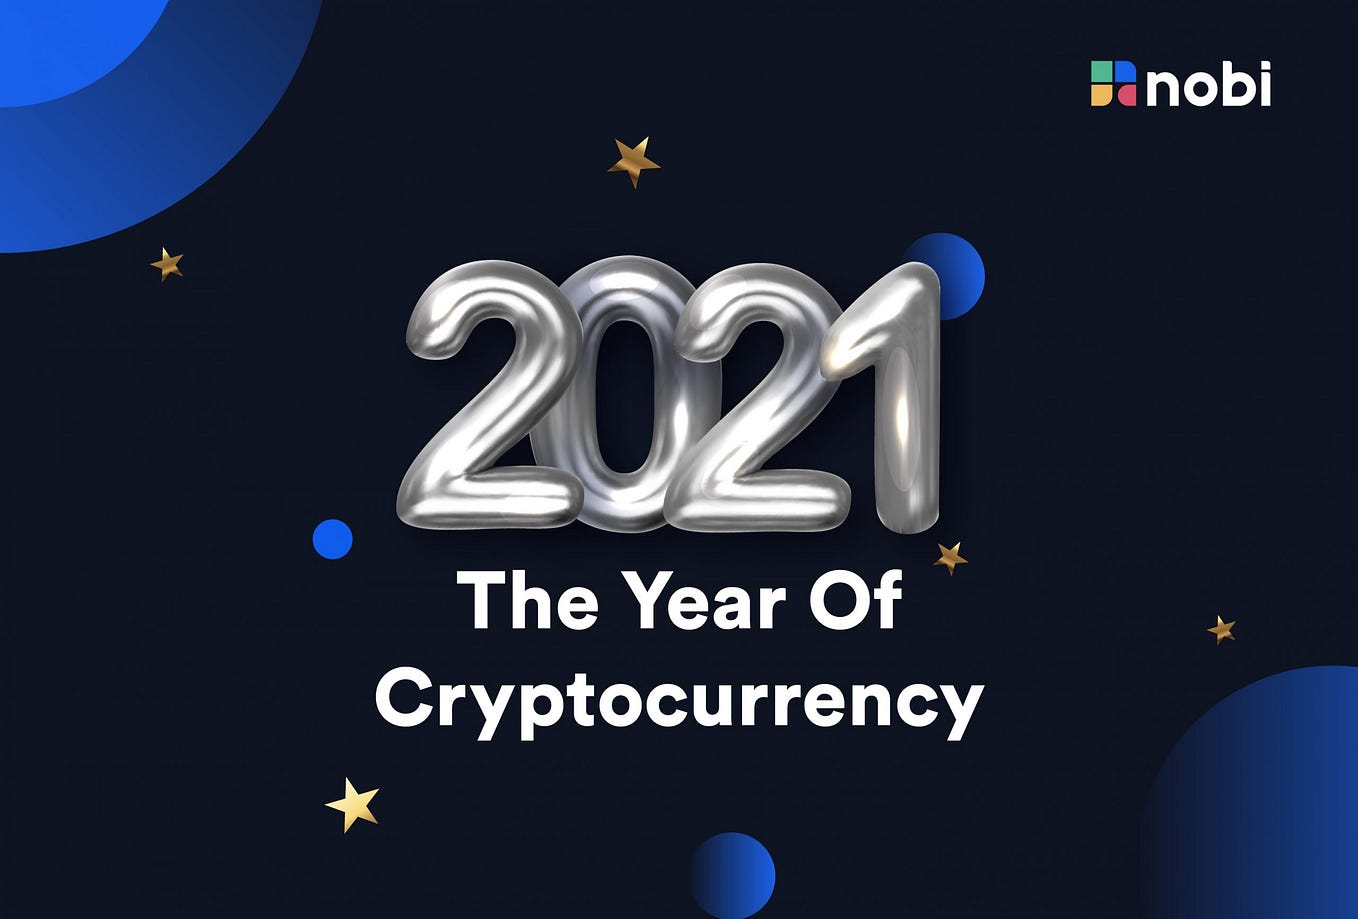 2021: The Year Of Cryptocurrencies